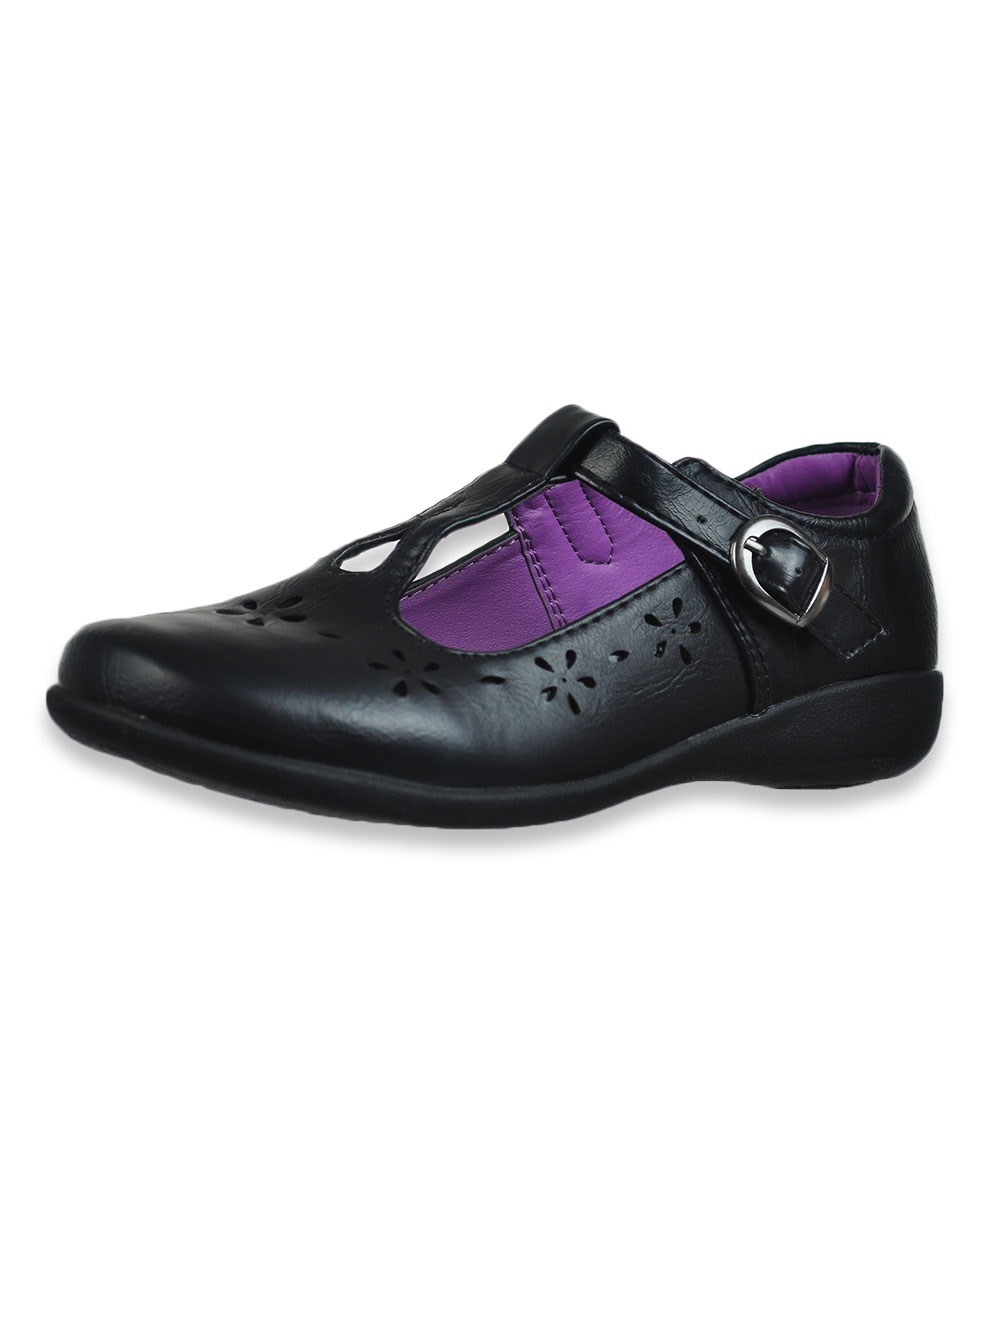 Girls' T-Strap Mary Janes by School 